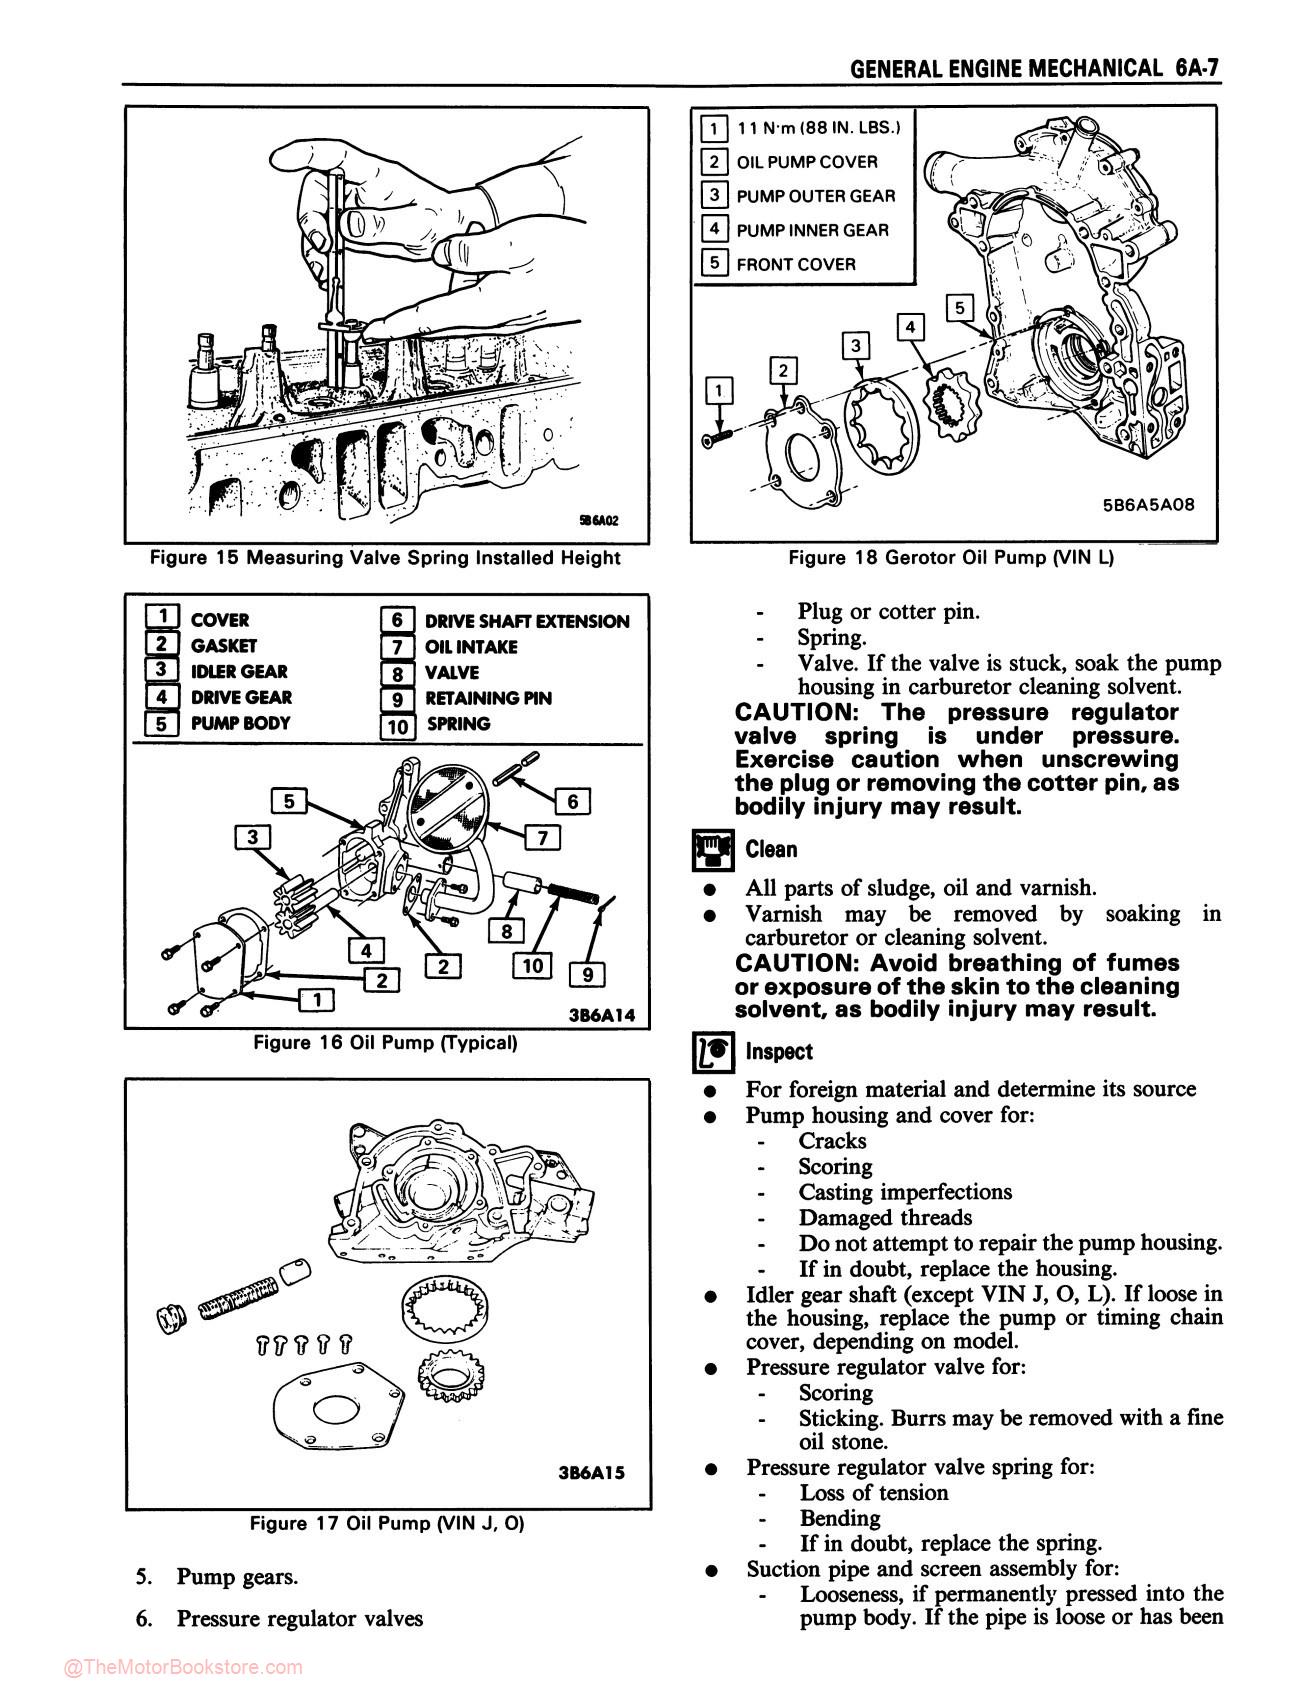 1985 Buick and Grand National Service Manual - Sample Page 2